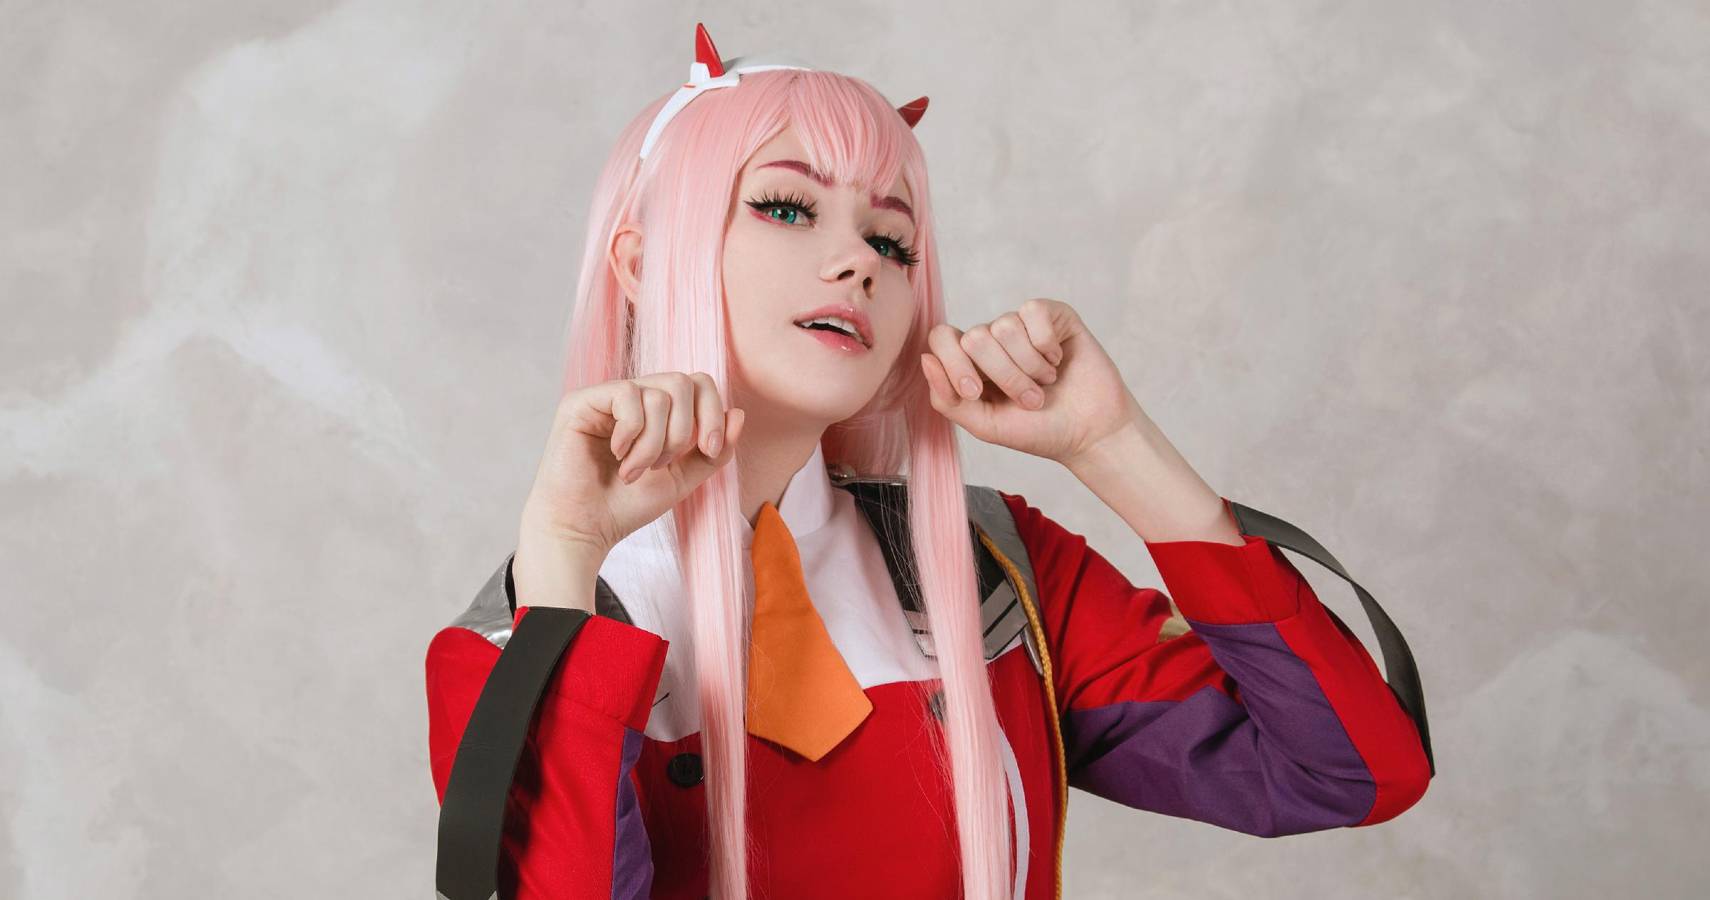 Cool anime cosplay costumes